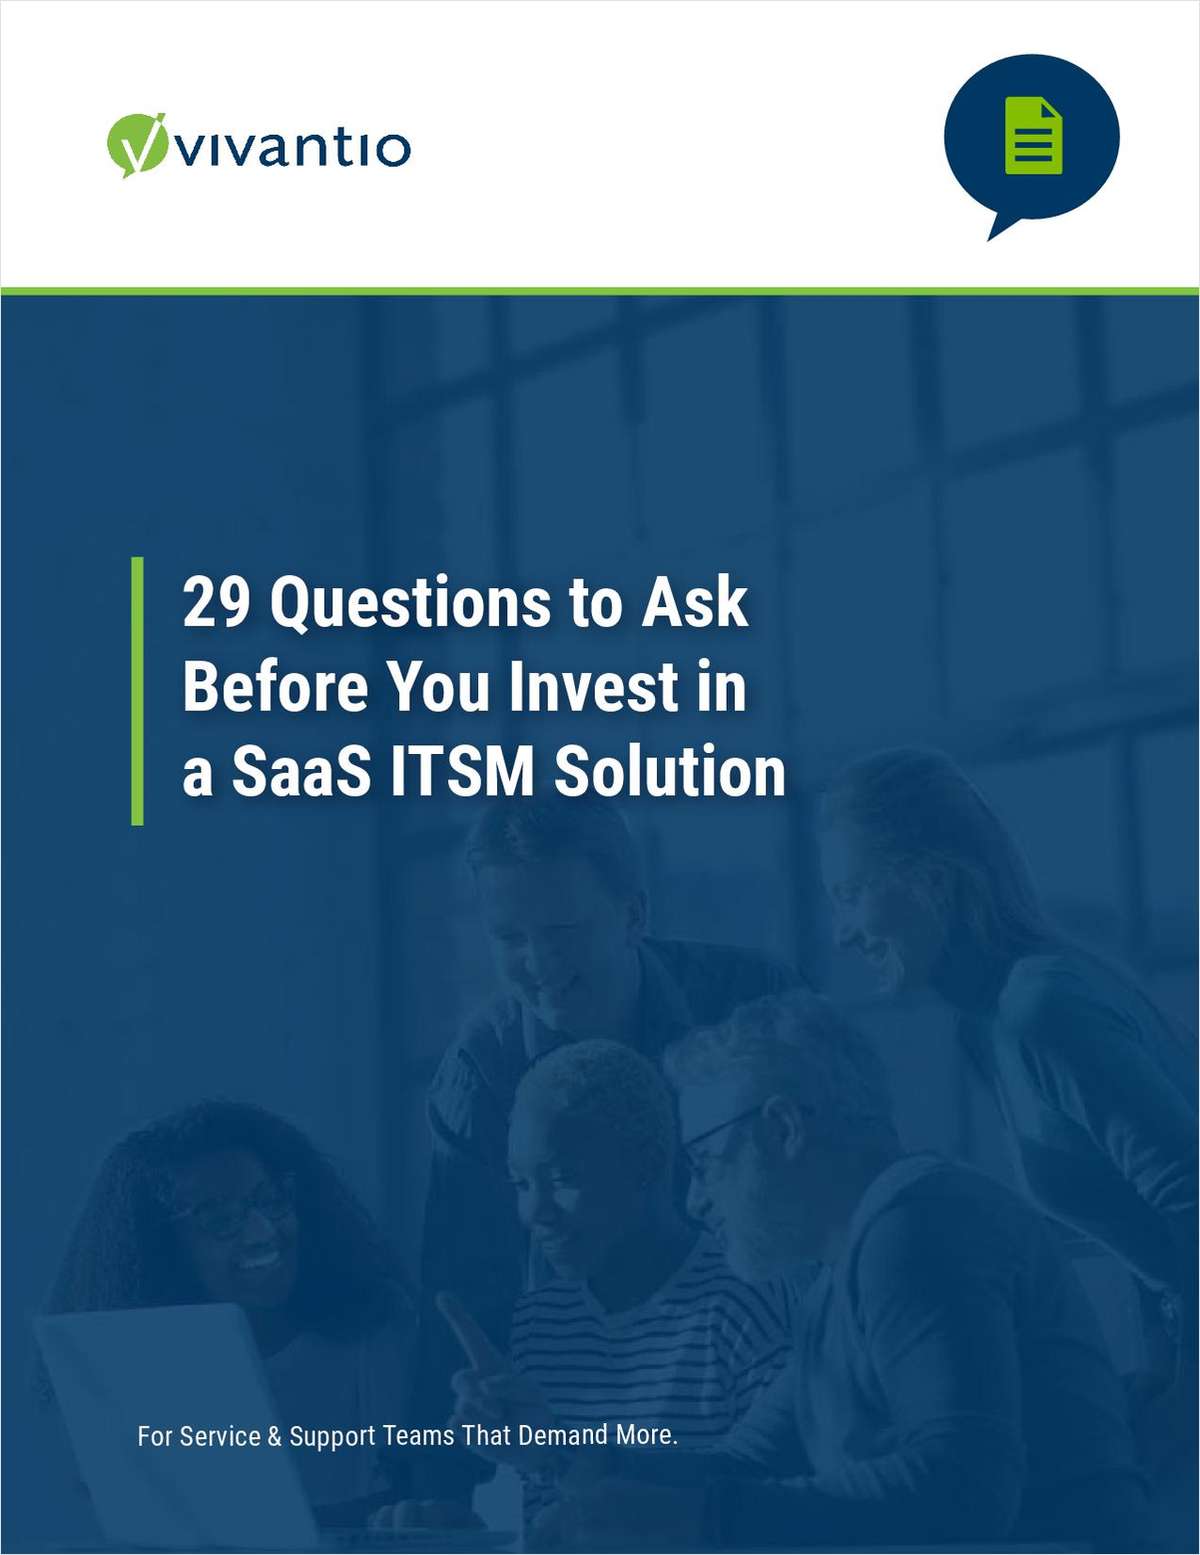 29 Questions to Ask Before You Invest in a SaaS ITSM Solution